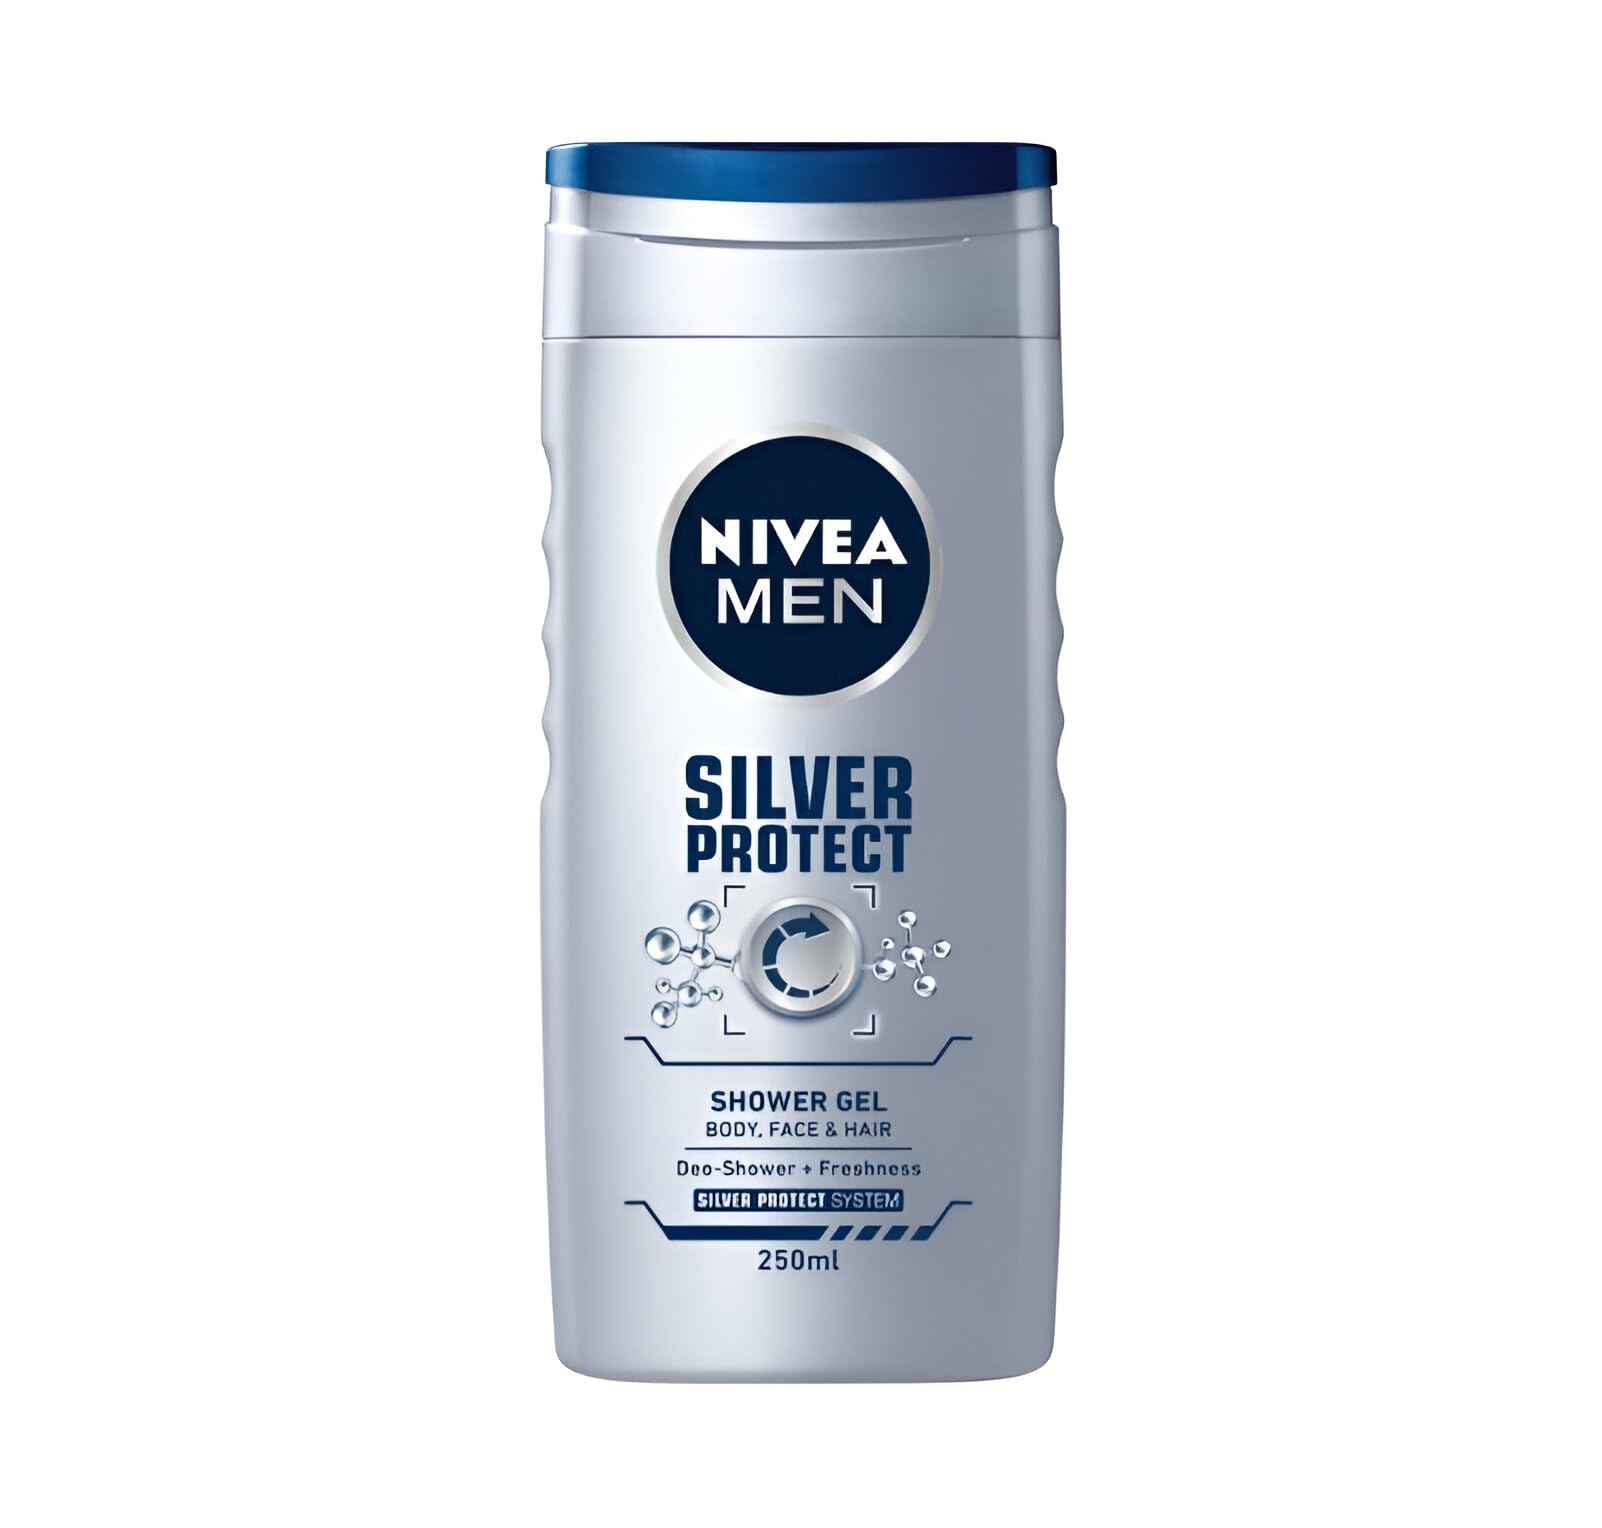 Nivea Shower Gel 250ml Men Silver Protect Cleansing Caring Silver Innovative 99% Biodegradable Formula With Ions for All Skin Types for Body, Face and Hair (Pack of 5)